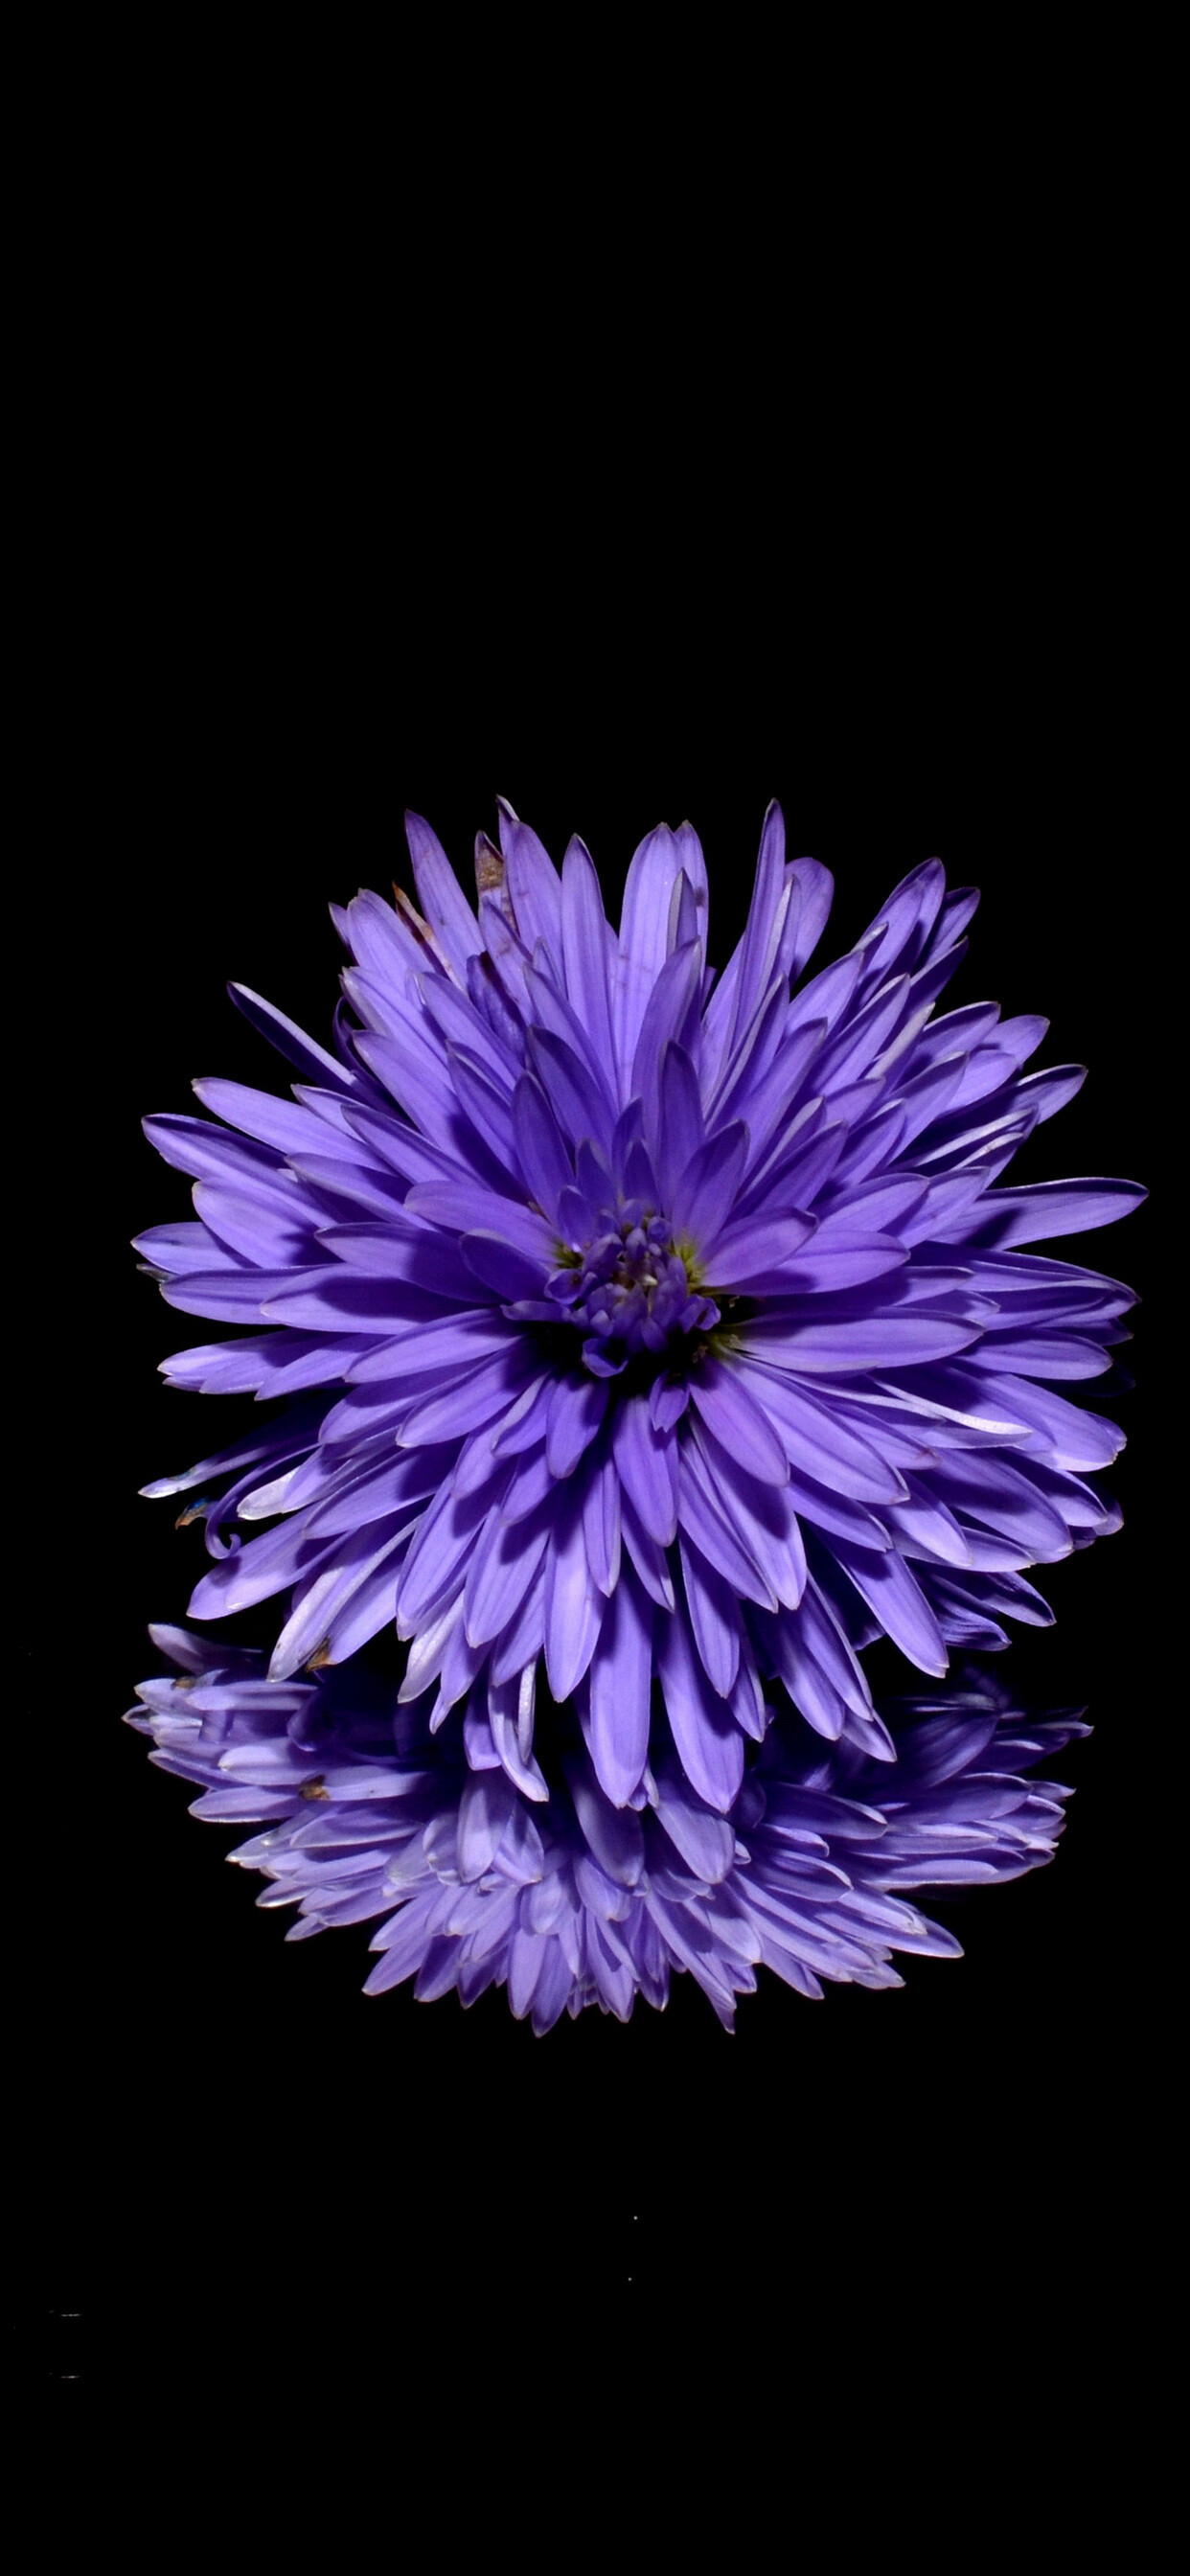 Chrysanthemum: The ray florets are considered imperfect flowers, as they only possess the female reproductive organs, while the disk florets are considered perfect flowers, as they possess both male and female reproductive organs, Herbaceous plant. 1250x2690 HD Background.